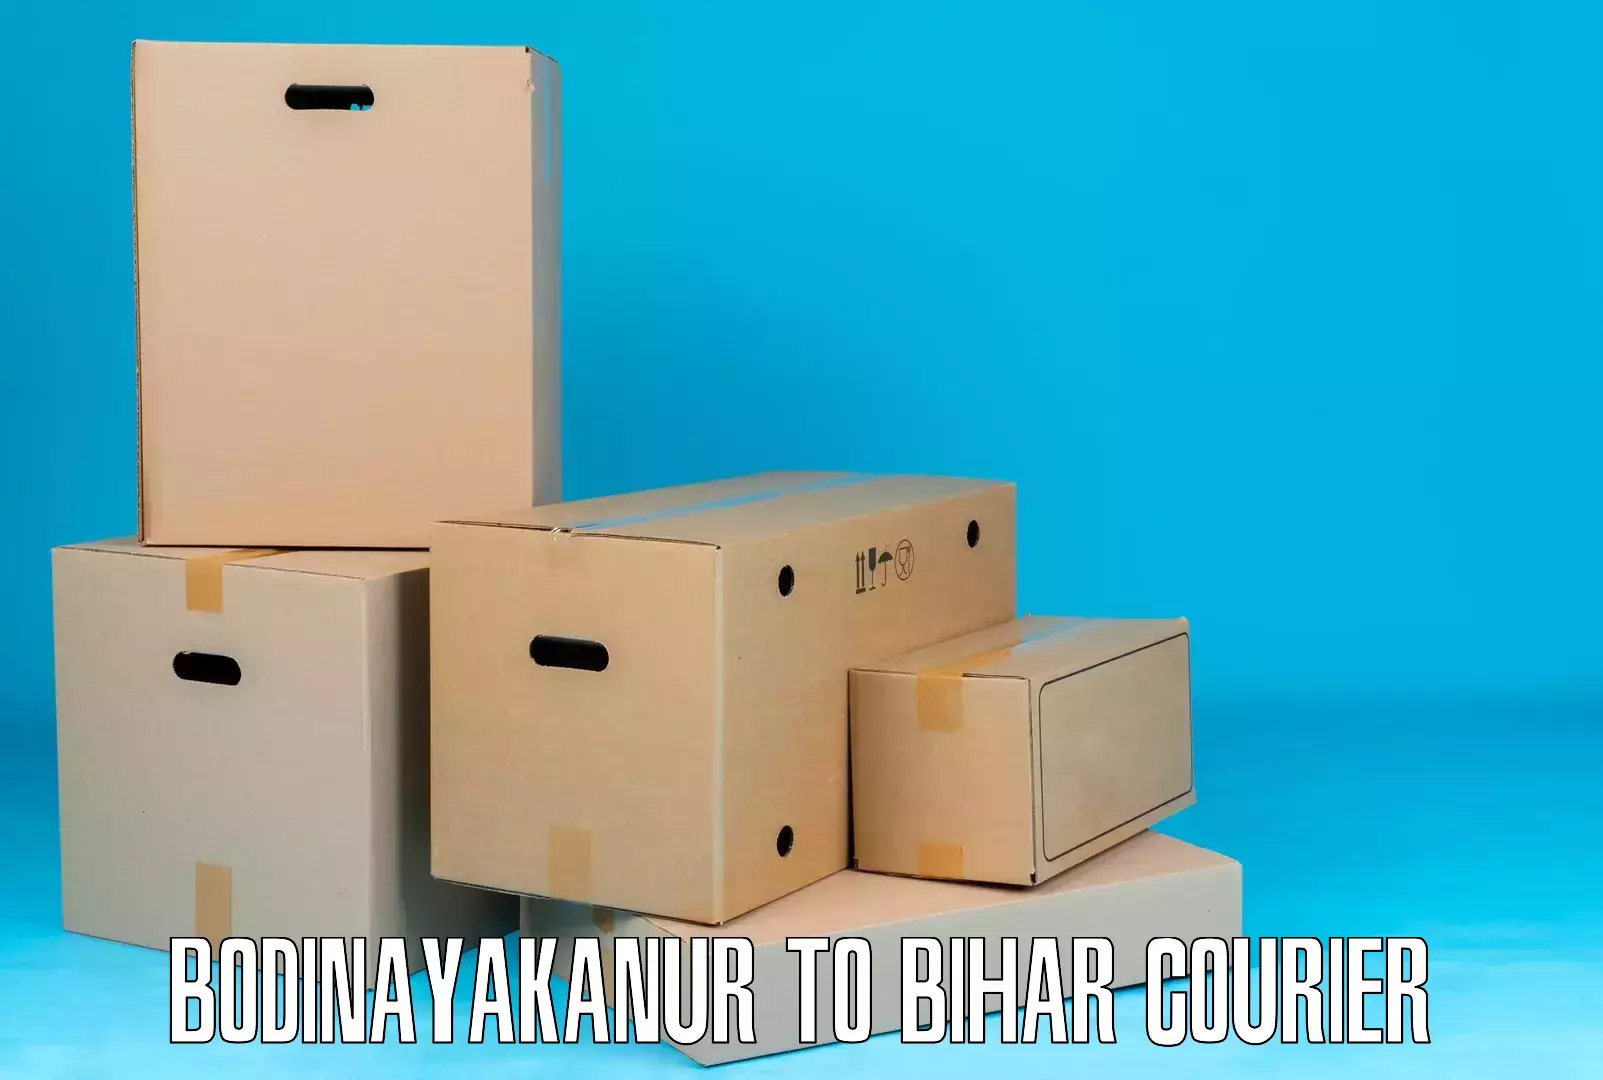 Global courier networks Bodinayakanur to Chainpur